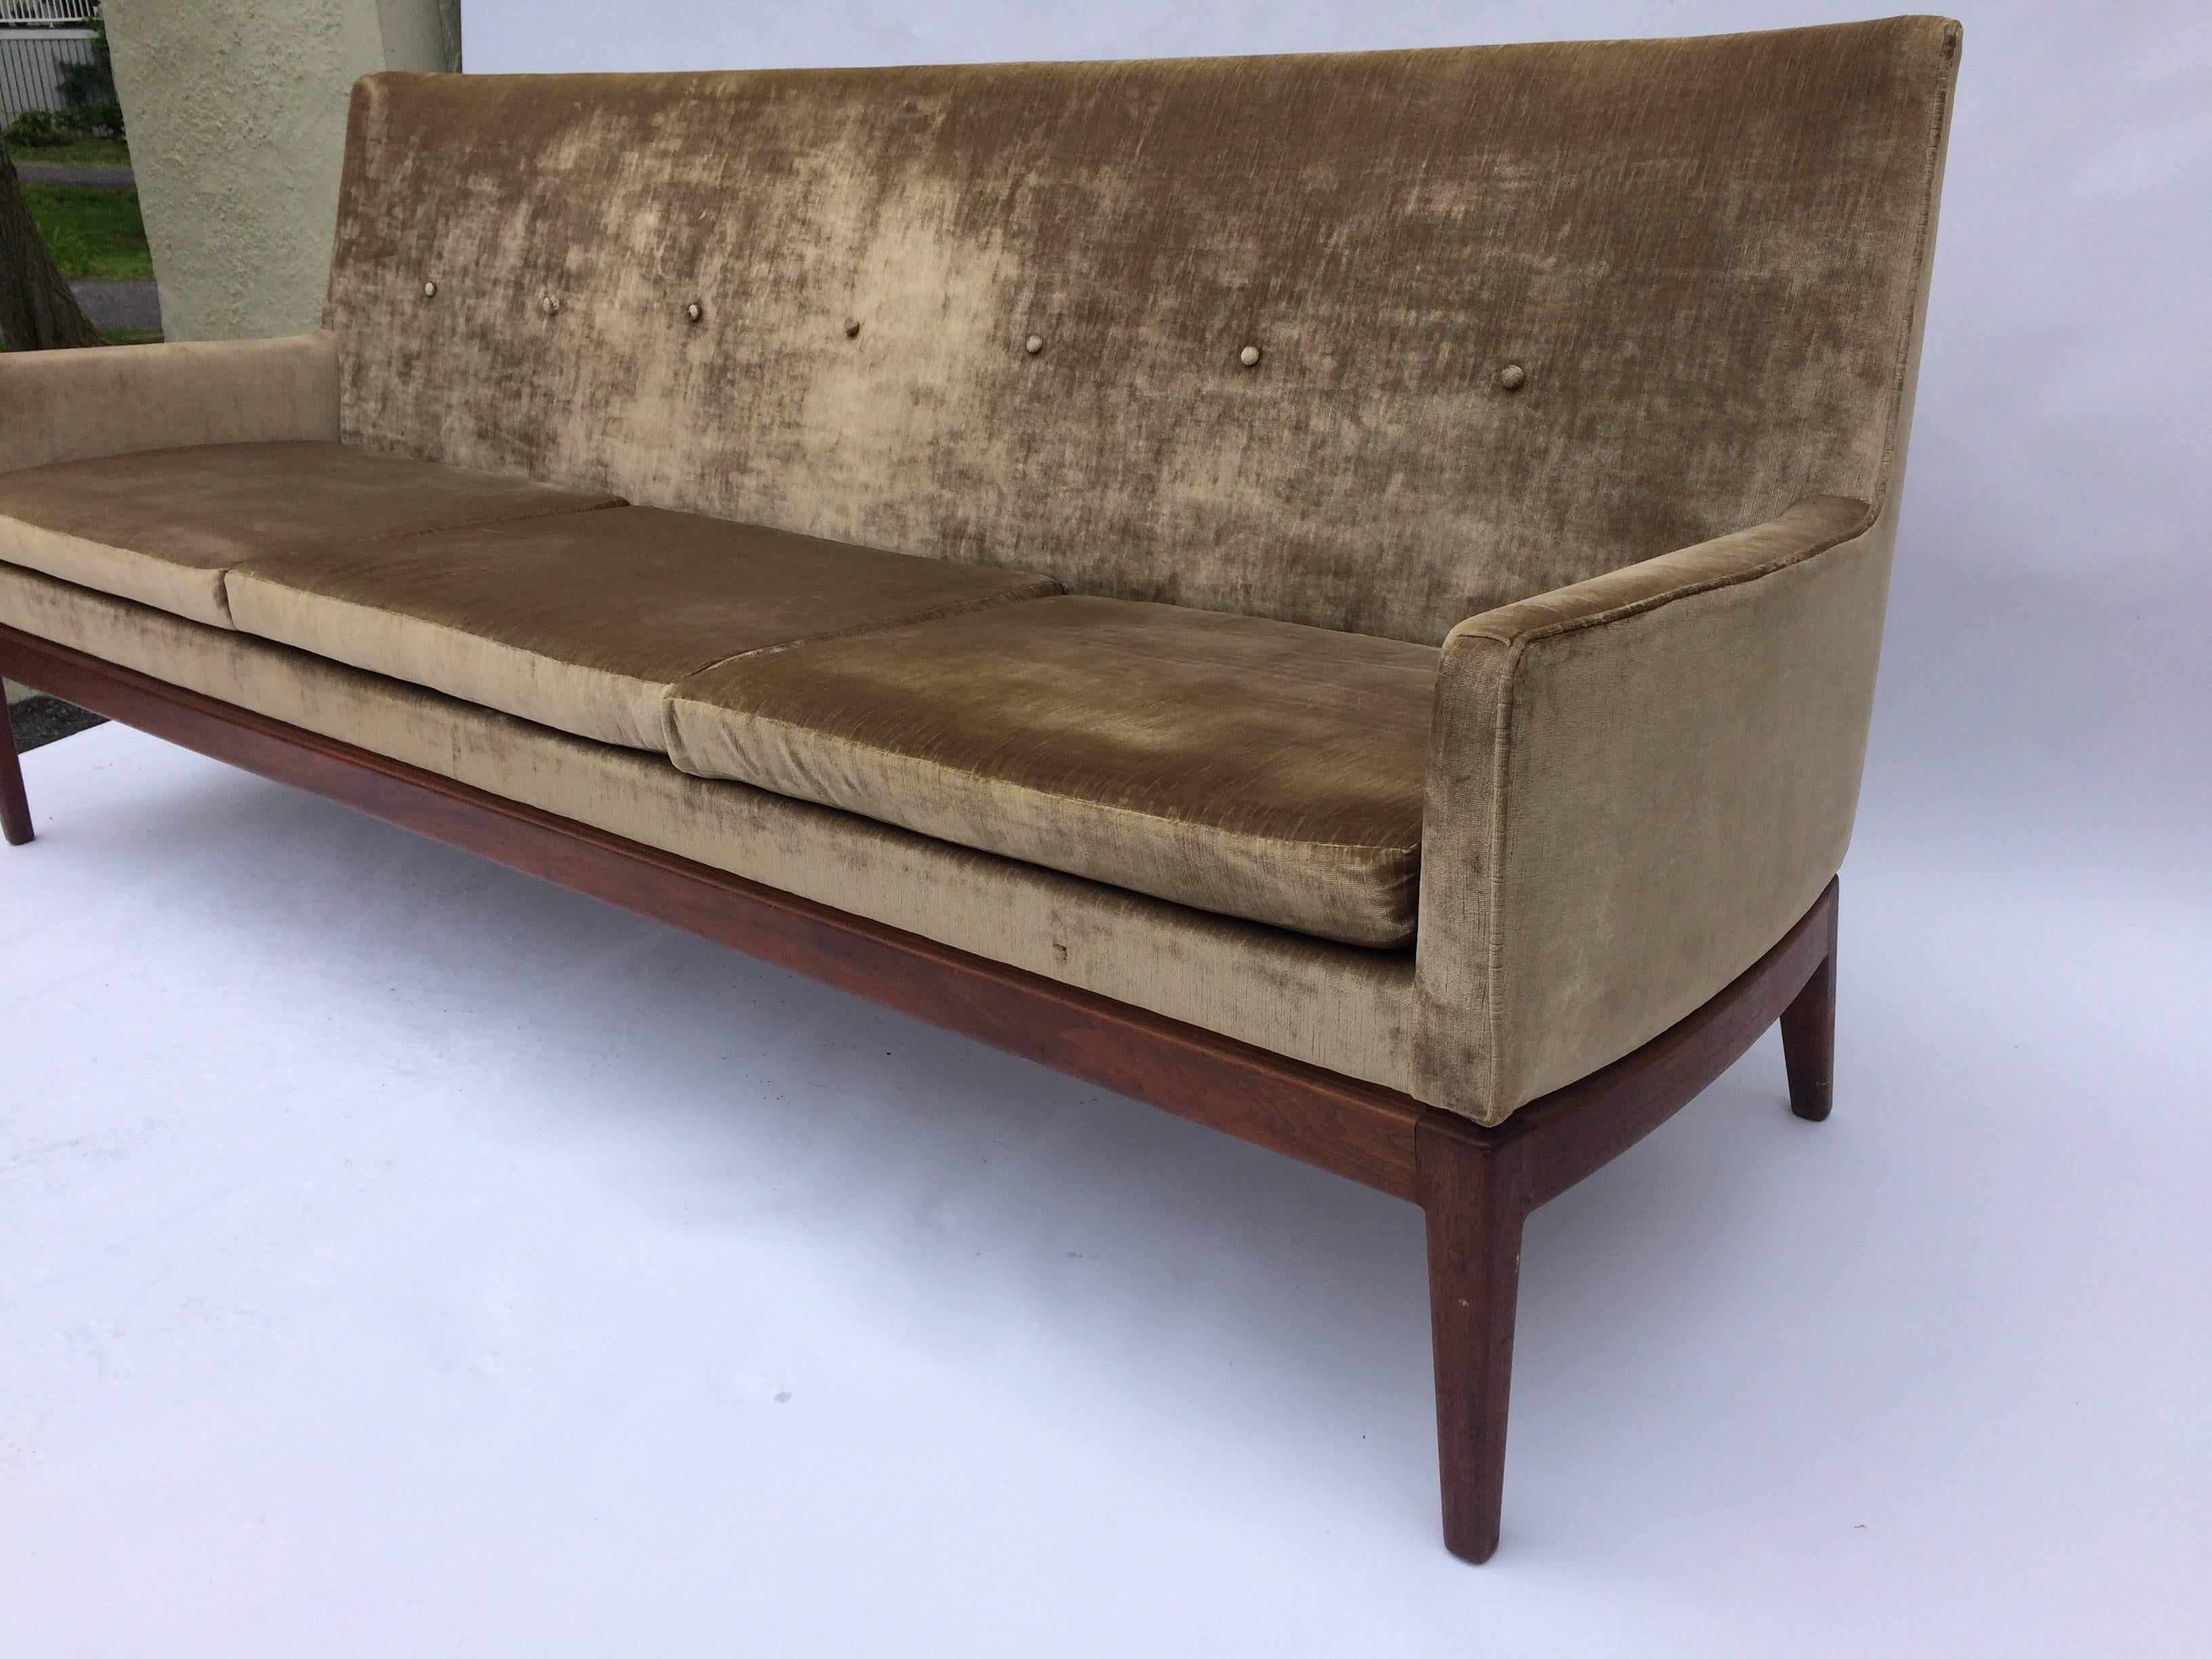 Jens Risom Danish sofa, upholstered in a taupe-y silver velvet. Elegant design, stately, and chic. Unable to identify makers mark on underside, seen in photos.
   